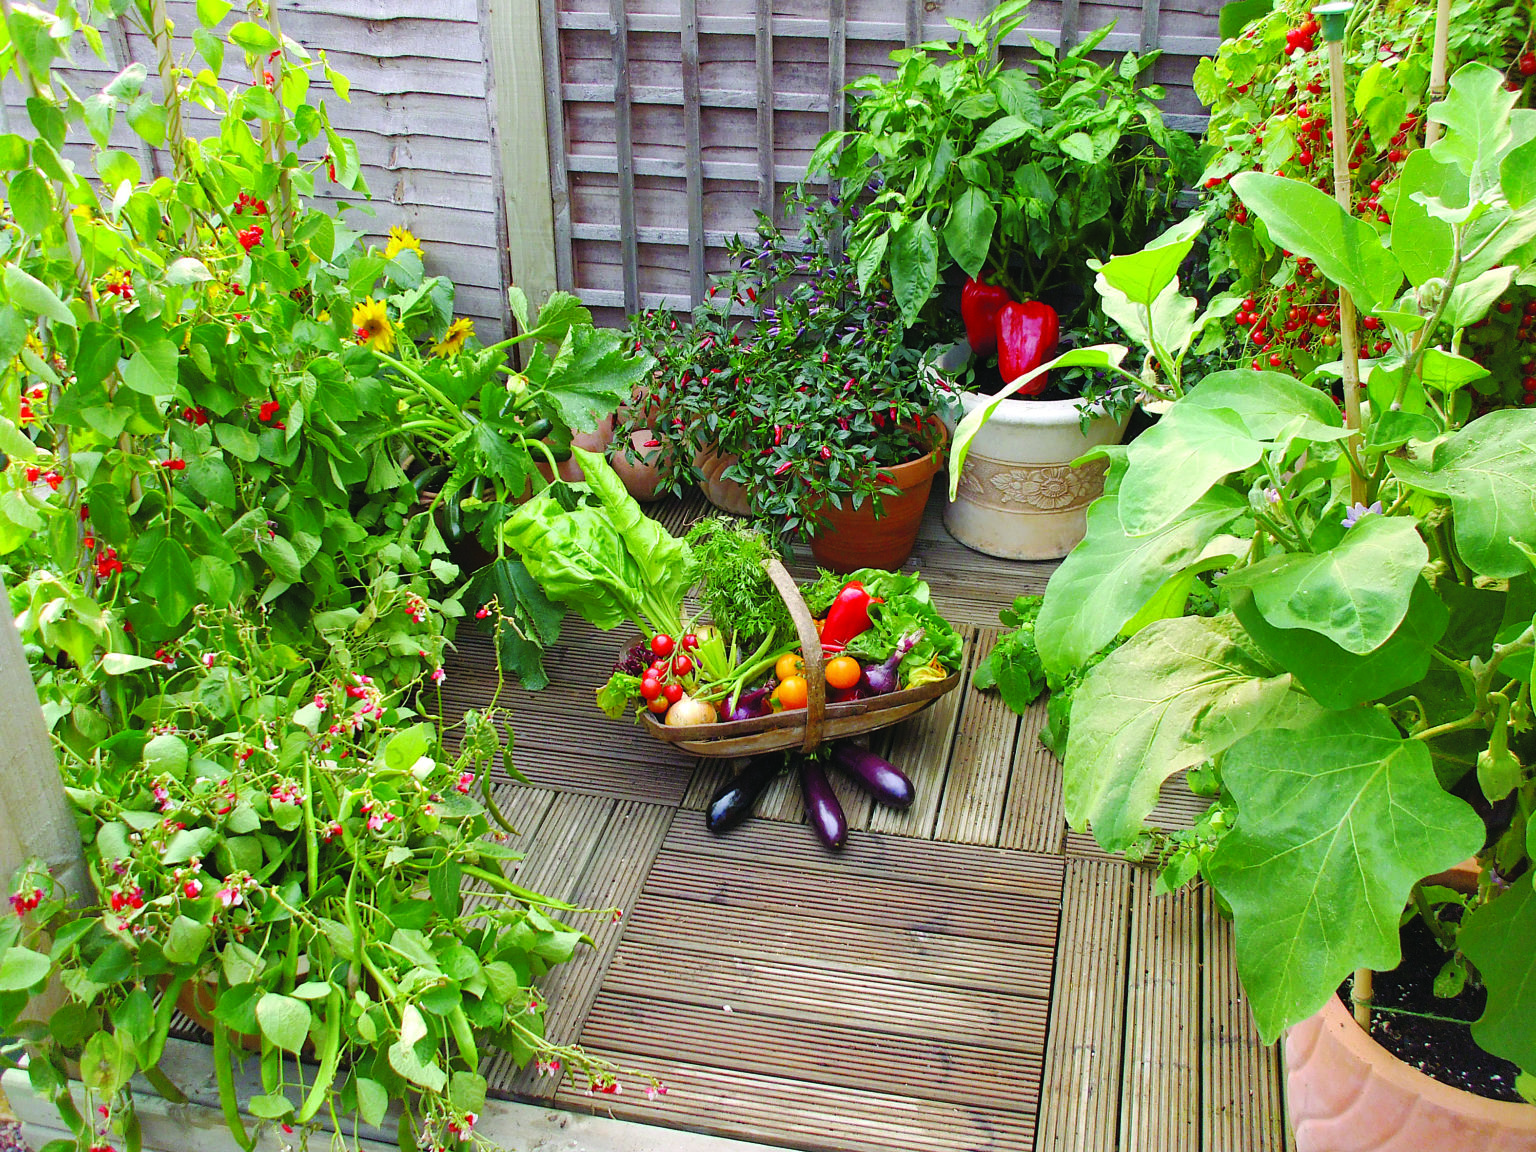 Guide to Growing Patio Fruit and Vegetables - Suttons Gardening Grow How